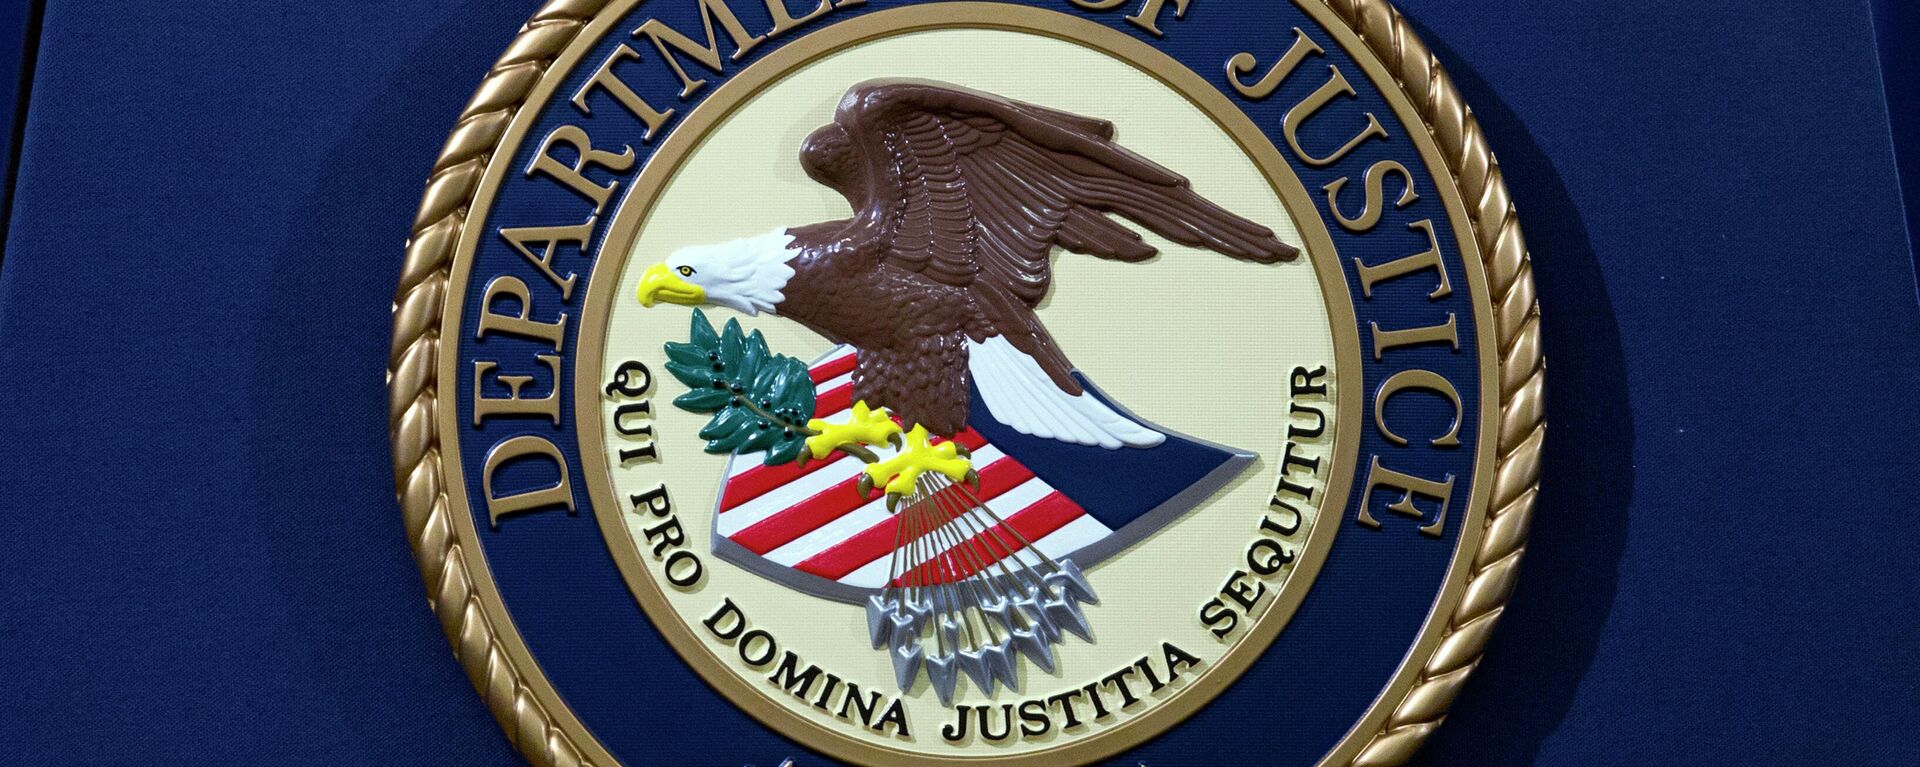 FILE - In this Nov. 28, 2018, file photo, the Department of Justice seal is seen in Washington, D.C. The Justice Department has released a new regulation spelling out detailed nationwide requirements for sex offender registration under a law Congress passed in 2006. The regulation released Monday stems from the Sex Offender Registration and Notification Act. It requires convicted sex offenders to register in the states in which they live, work or attend school.  (AP Photo/Jose Luis Magana, File) - Sputnik India, 1920, 21.03.2024